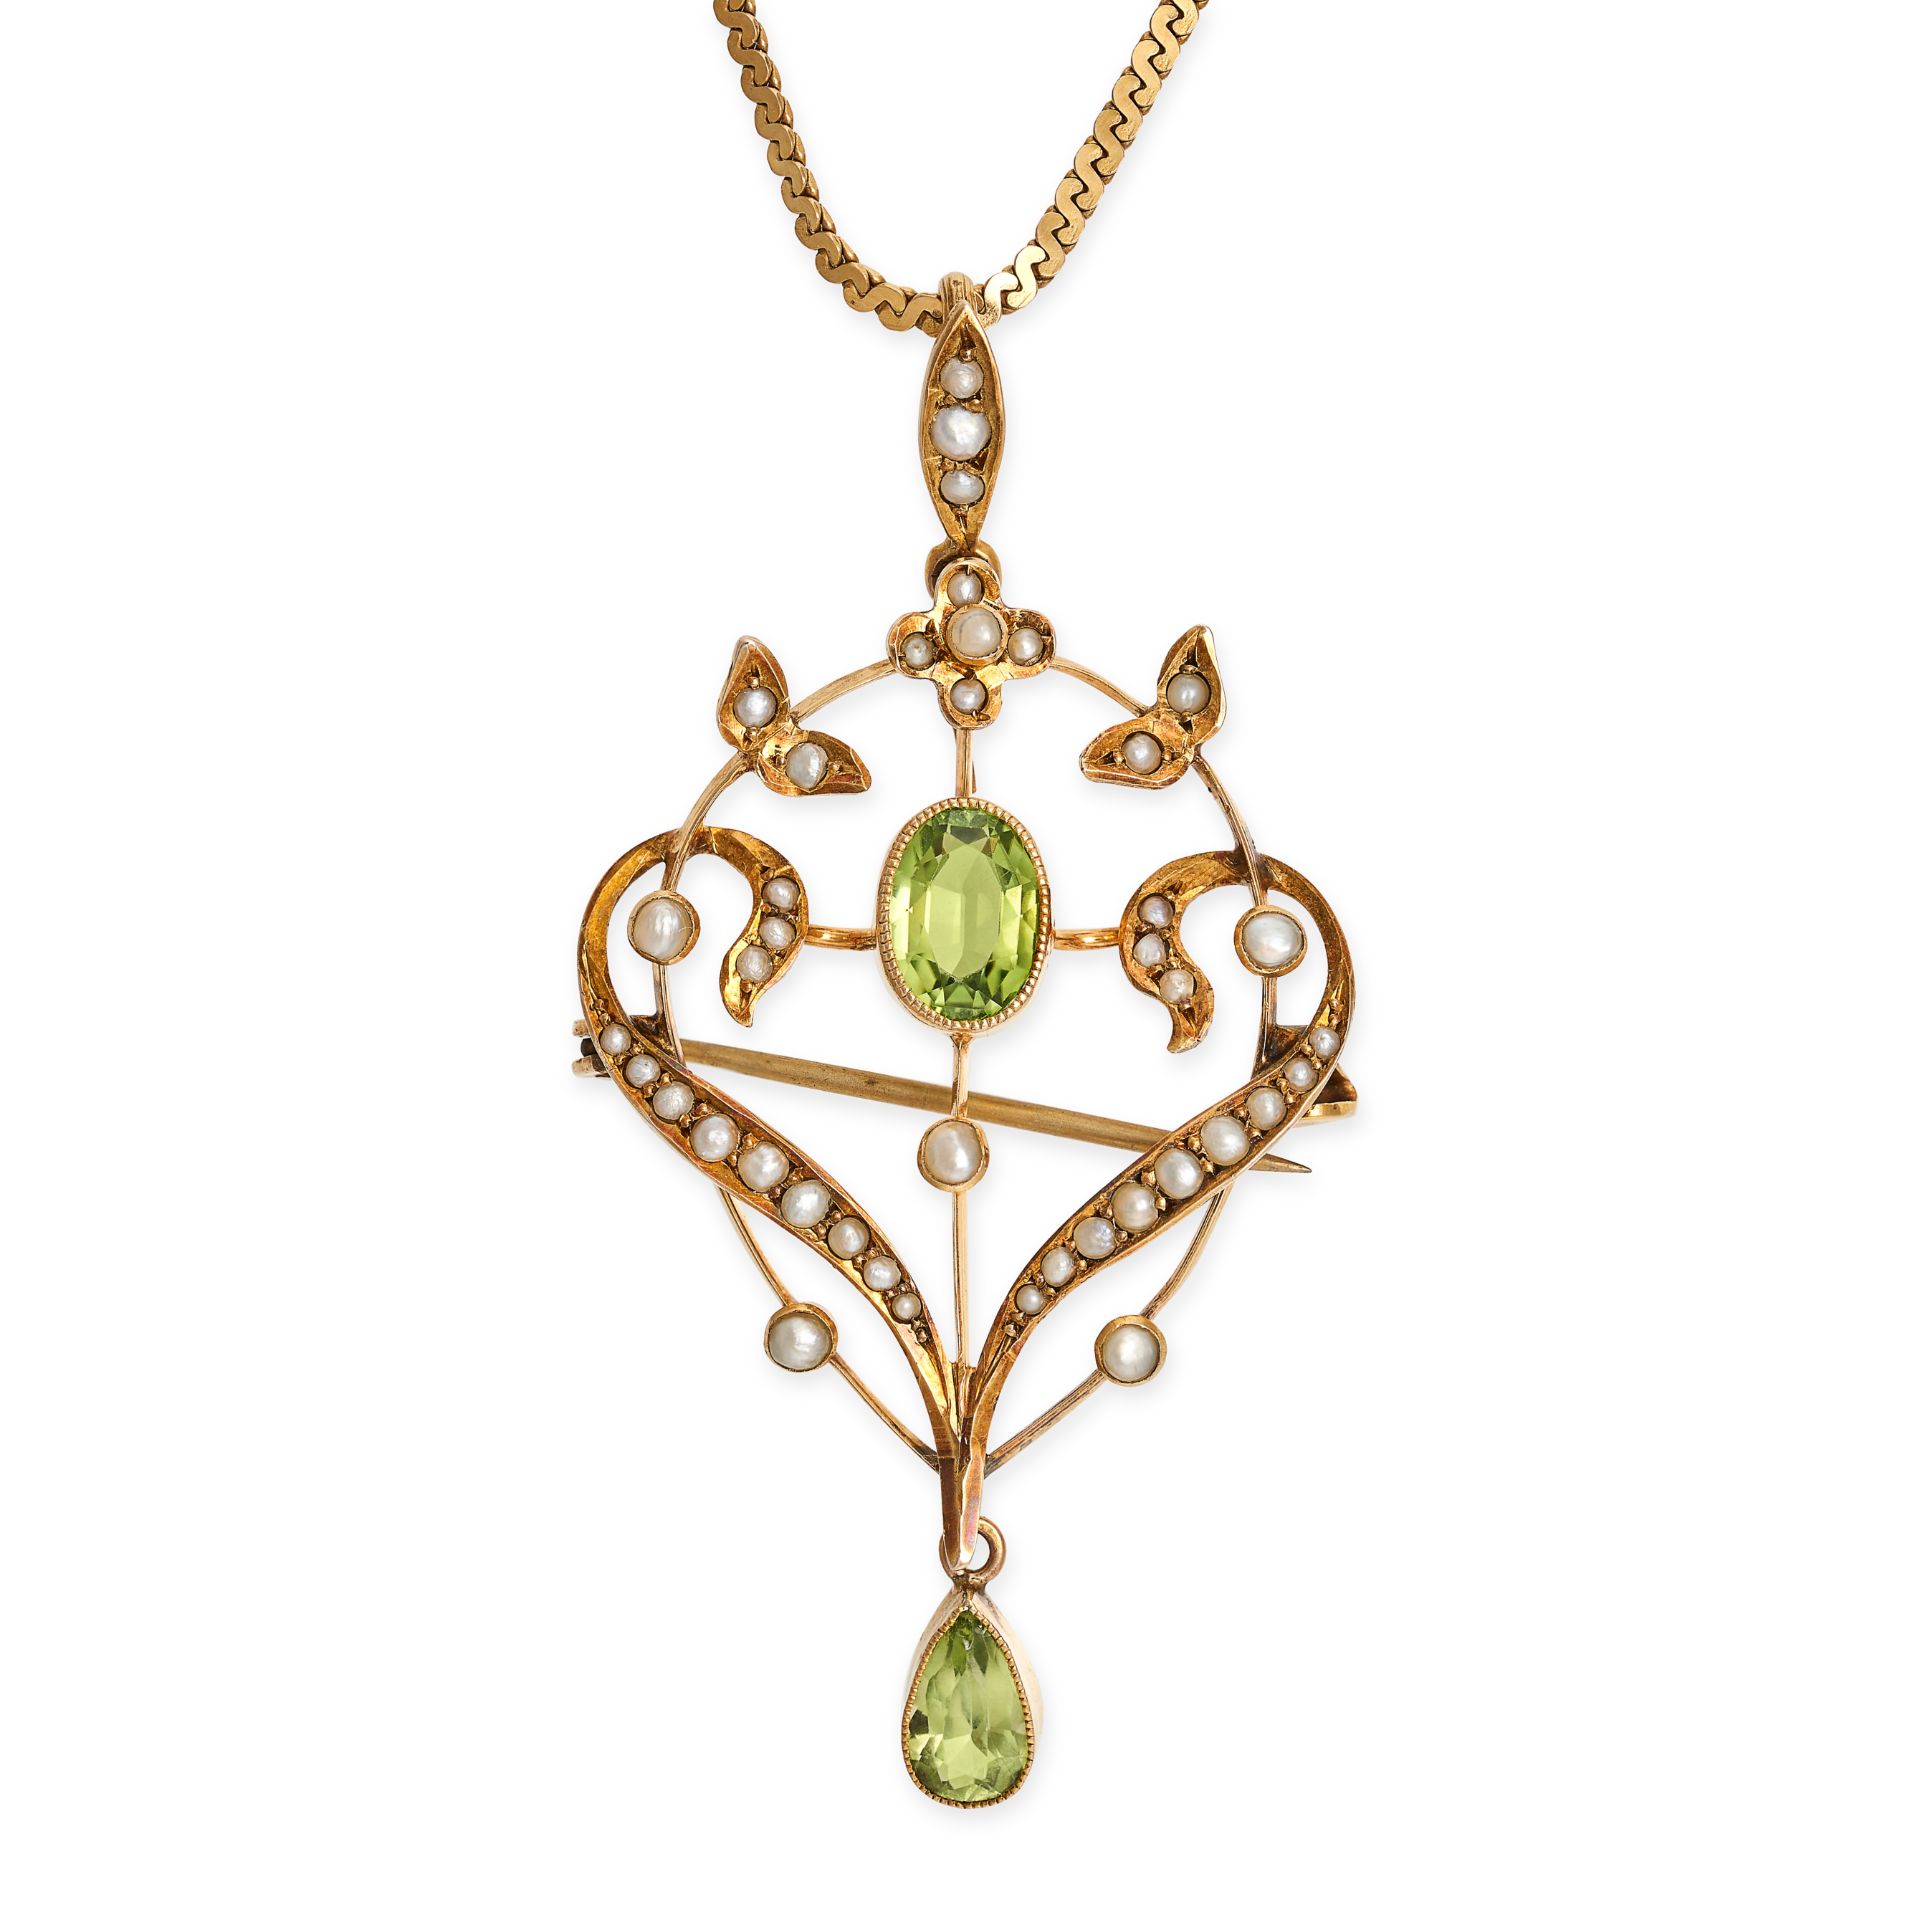 AN ANTIQUE EDWARDIAN PERIDOT AND SEED PEARL BROOCH / PENDANT NECKLACE in 9ct yellow gold, the scr...